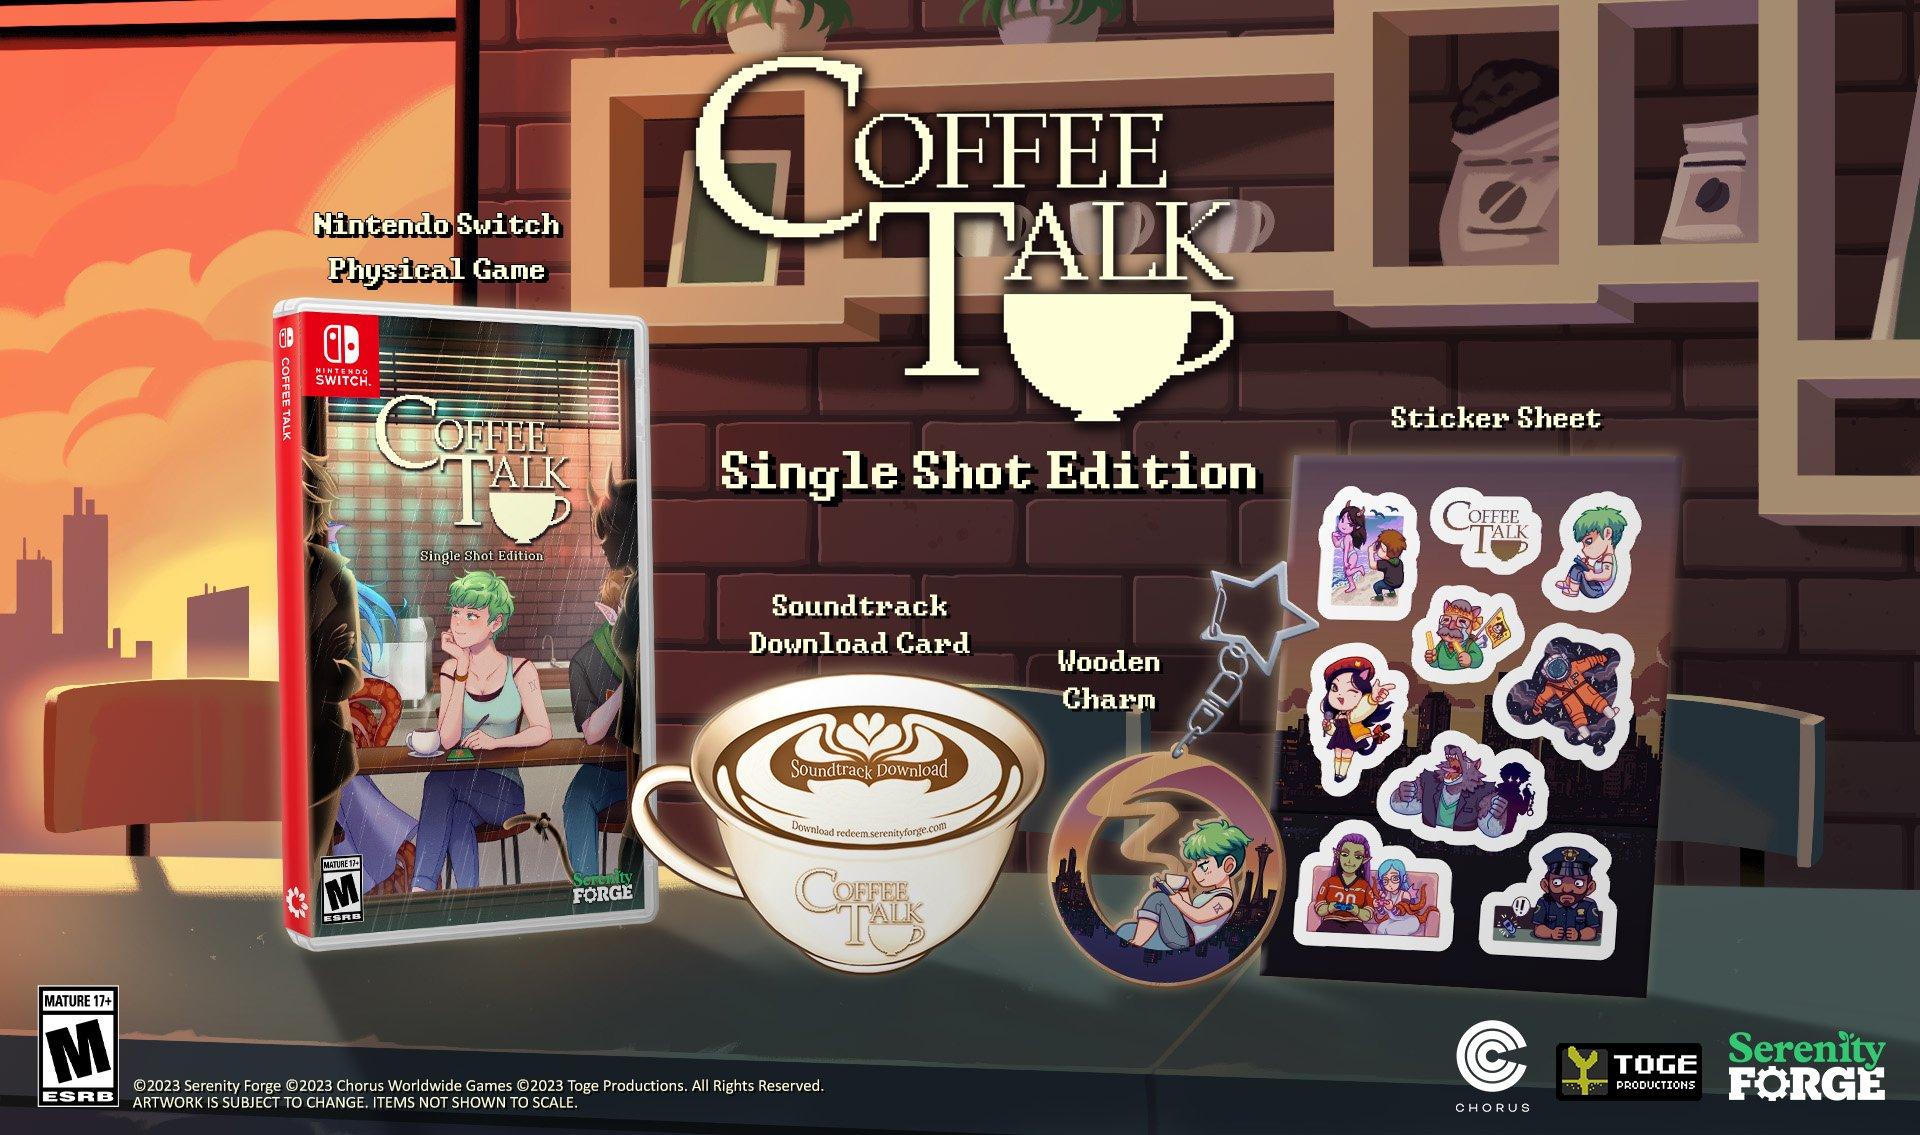 The Video Game 'Coffee Talk' Brings the Coffee Shop to You